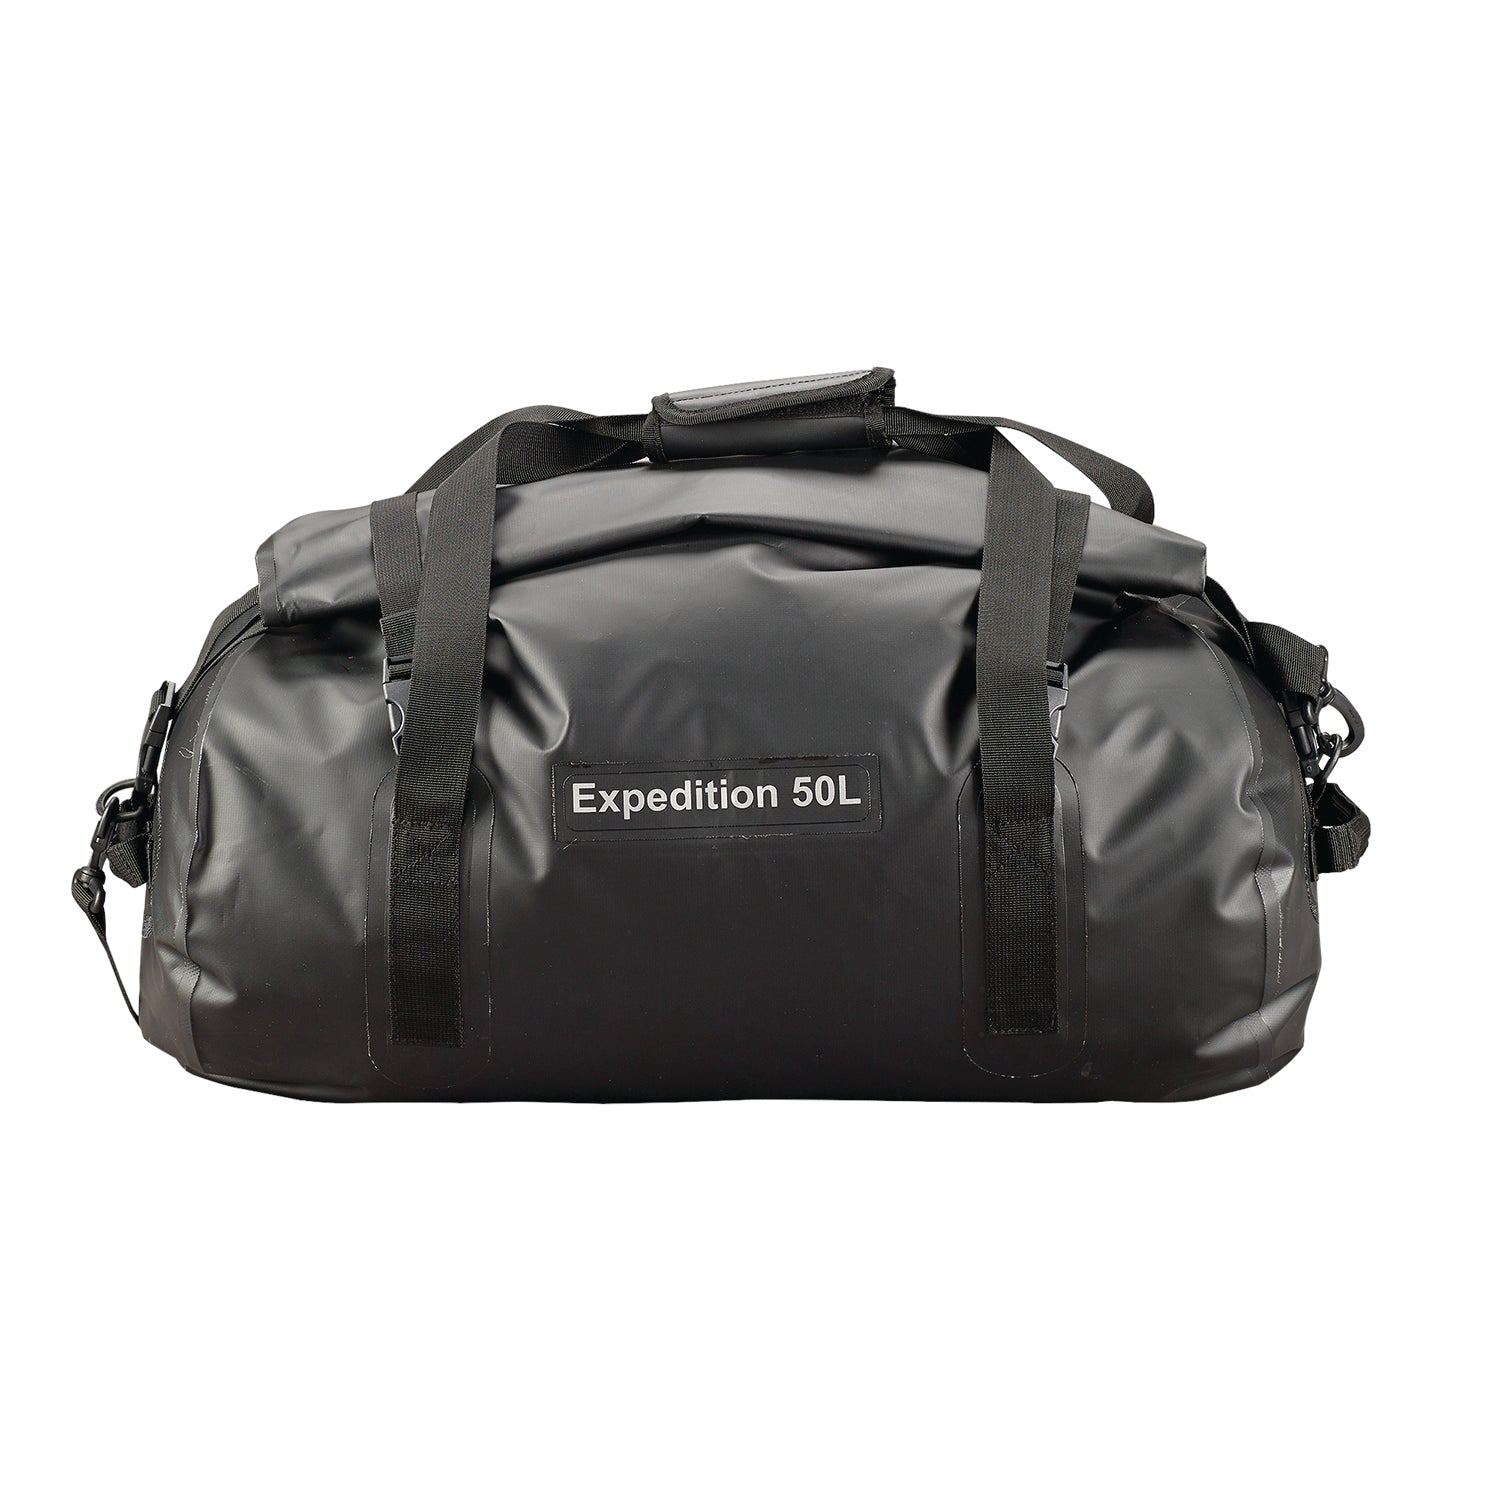 Caribee Expedition 50L waterproof kit bag with roll top